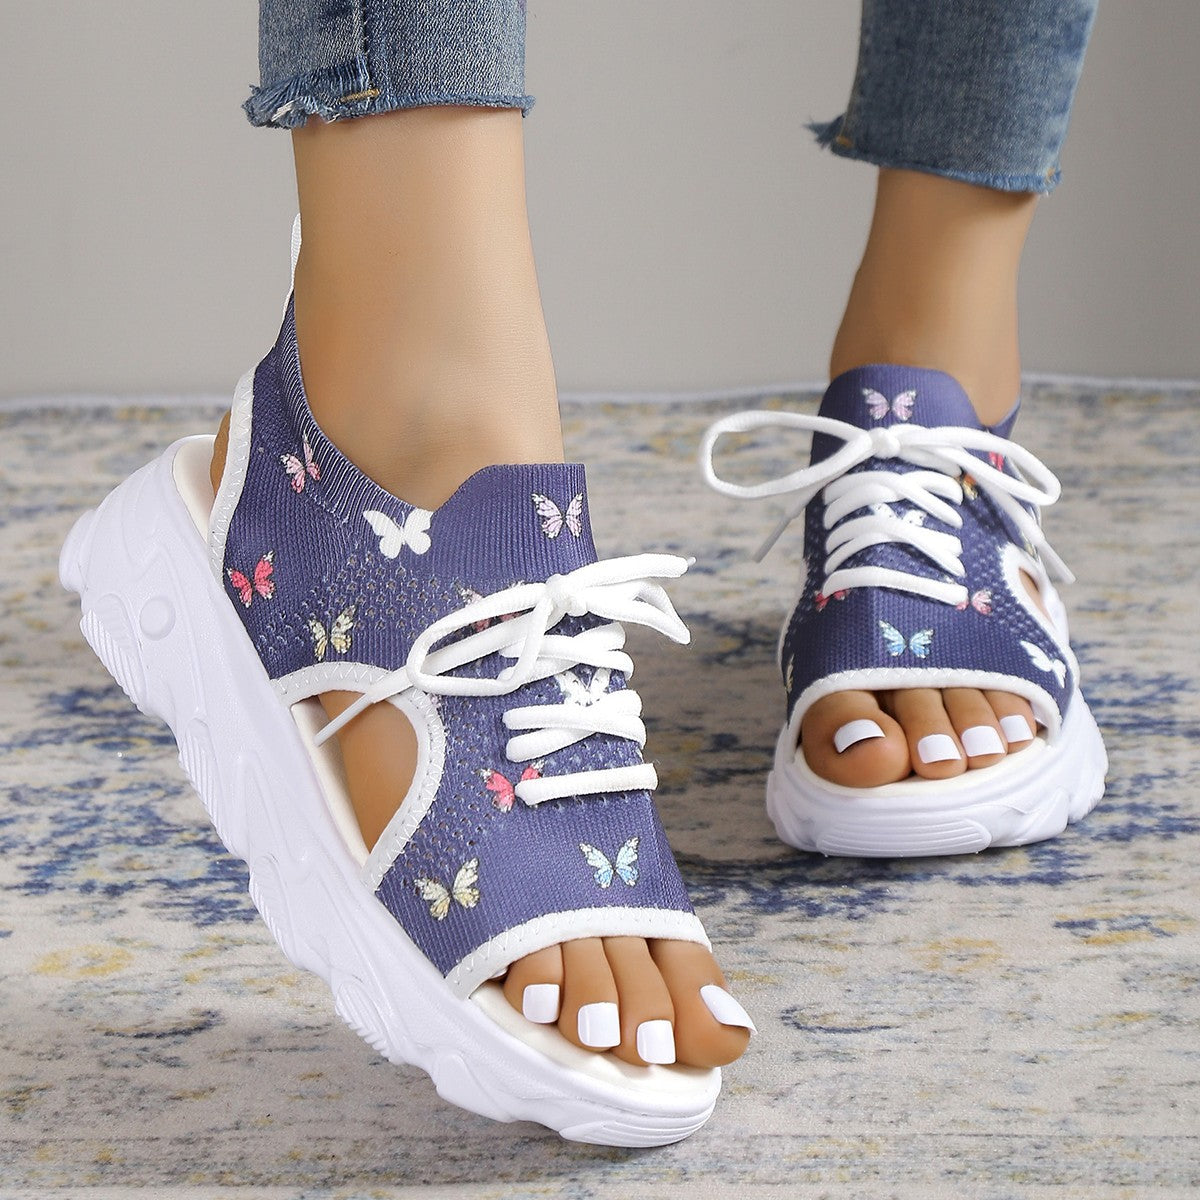 sandals  | Print Lace-up Sports Sandals Summer Peep Toe Casual Mesh Shoes | Purple Butterfly |  35.| thecurvestory.myshopify.com